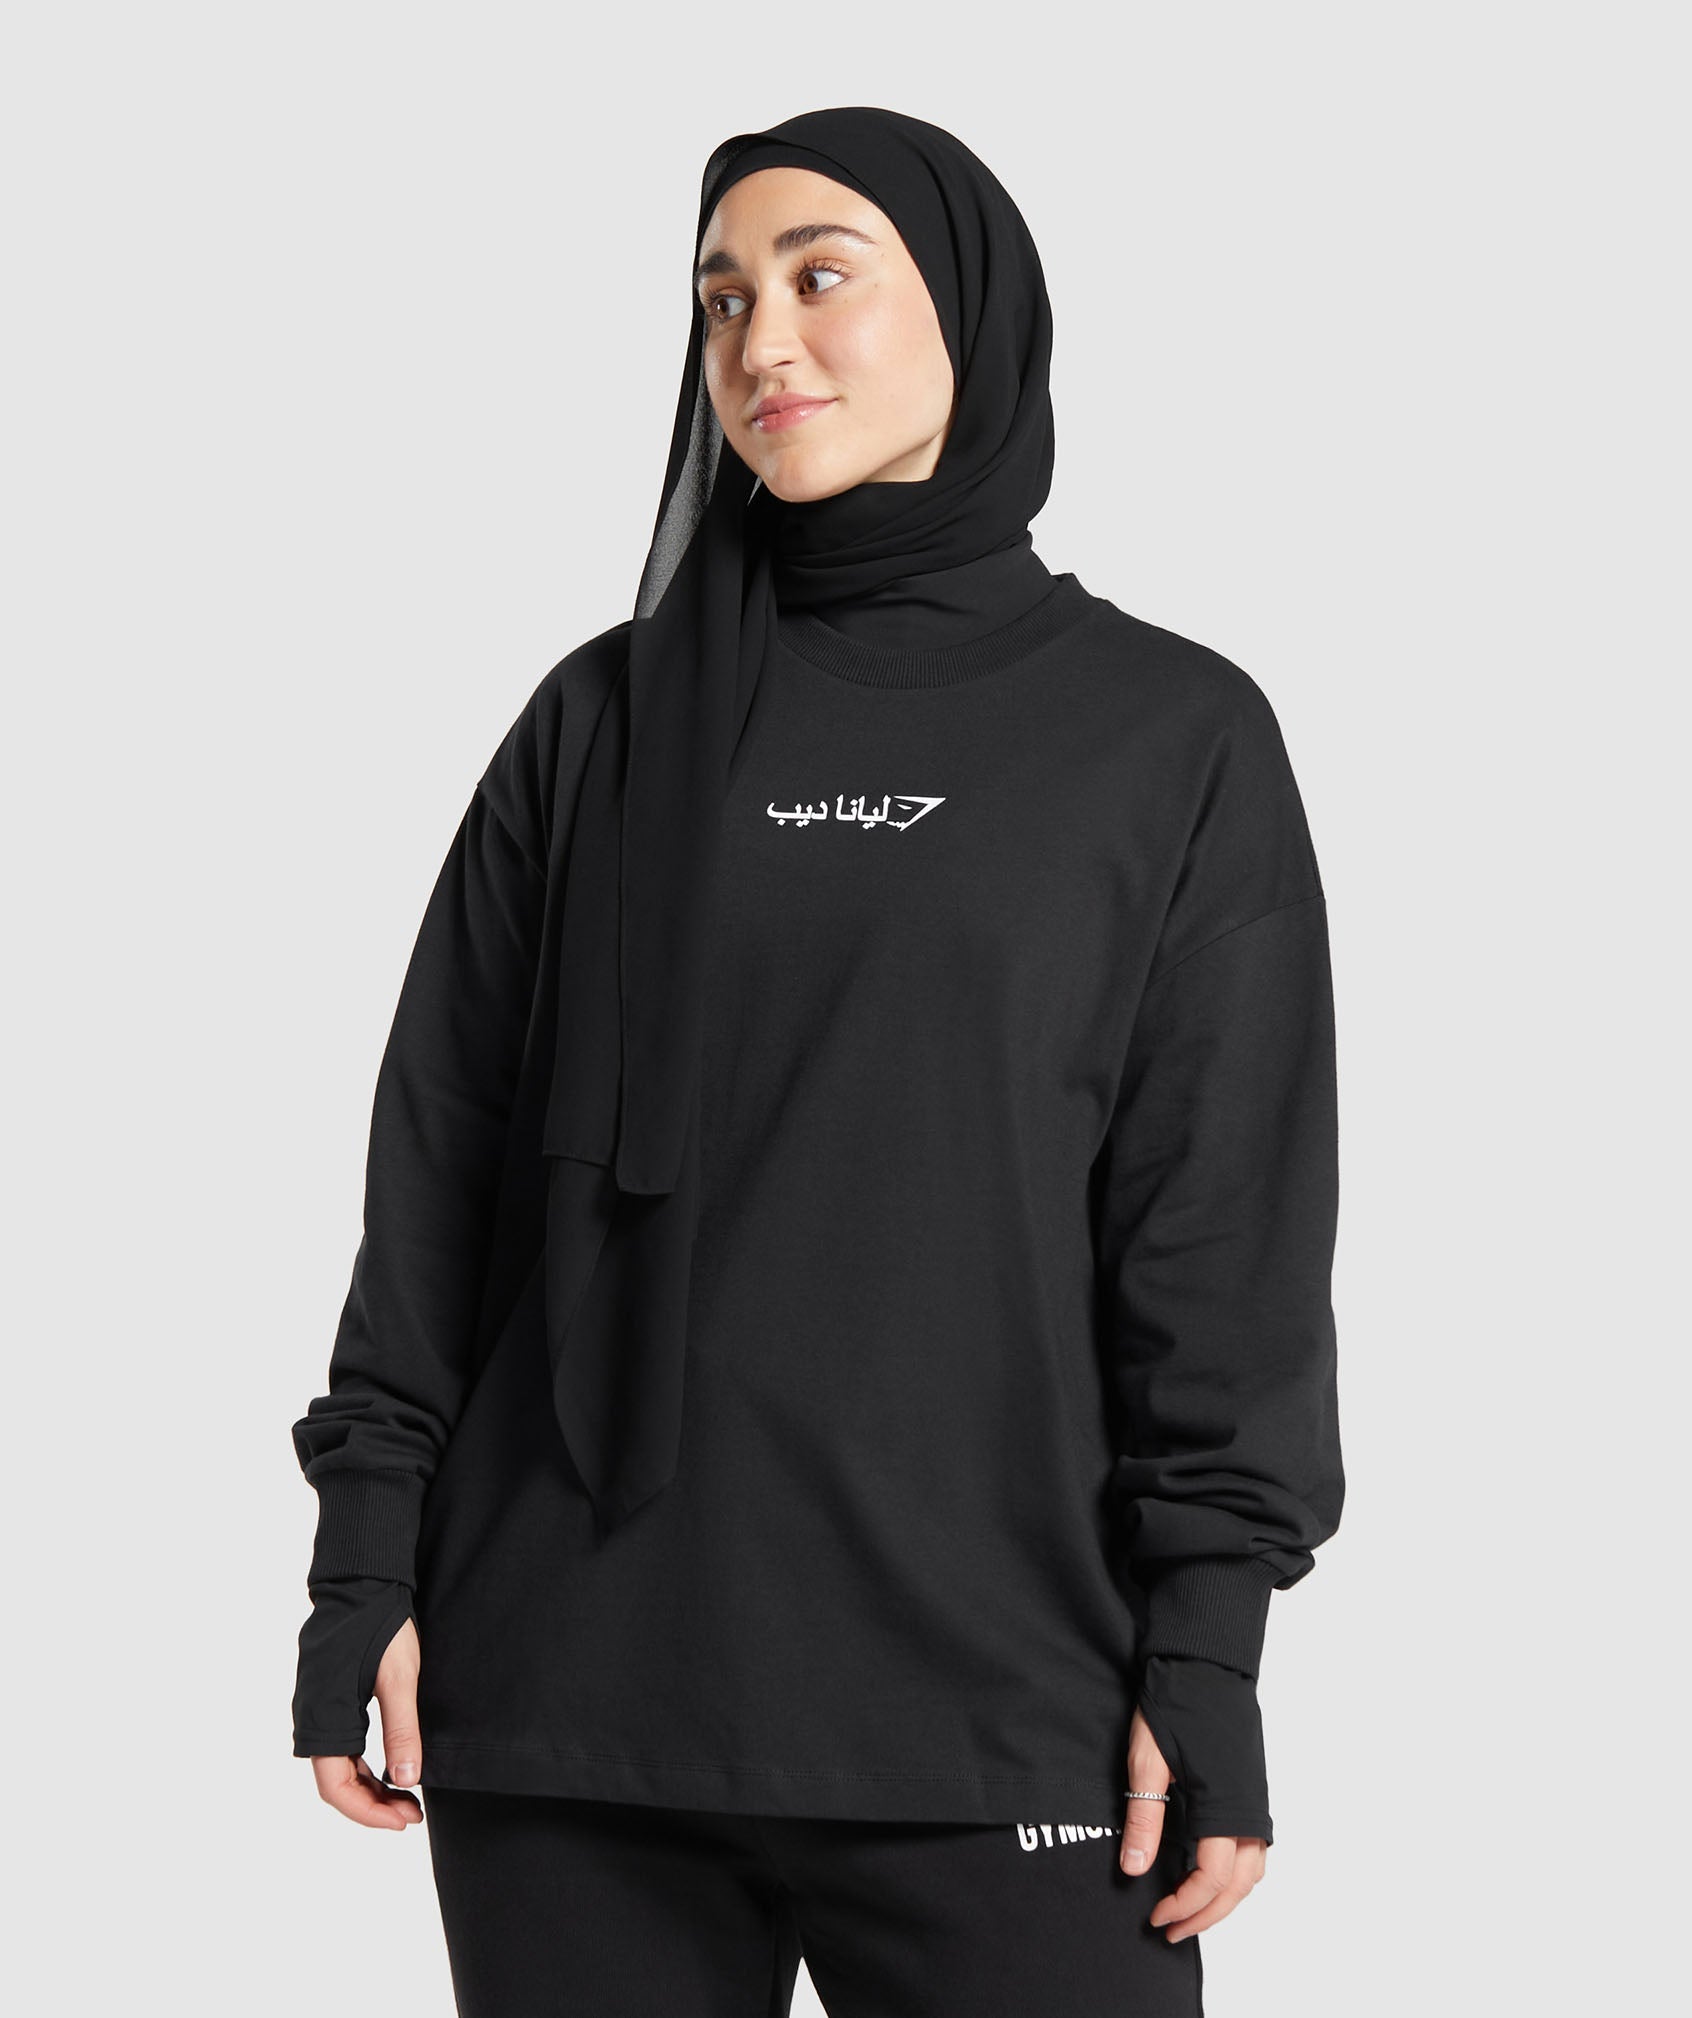 GS X Leana Deeb Oversized Long Sleeve Top in {{variantColor} is out of stock